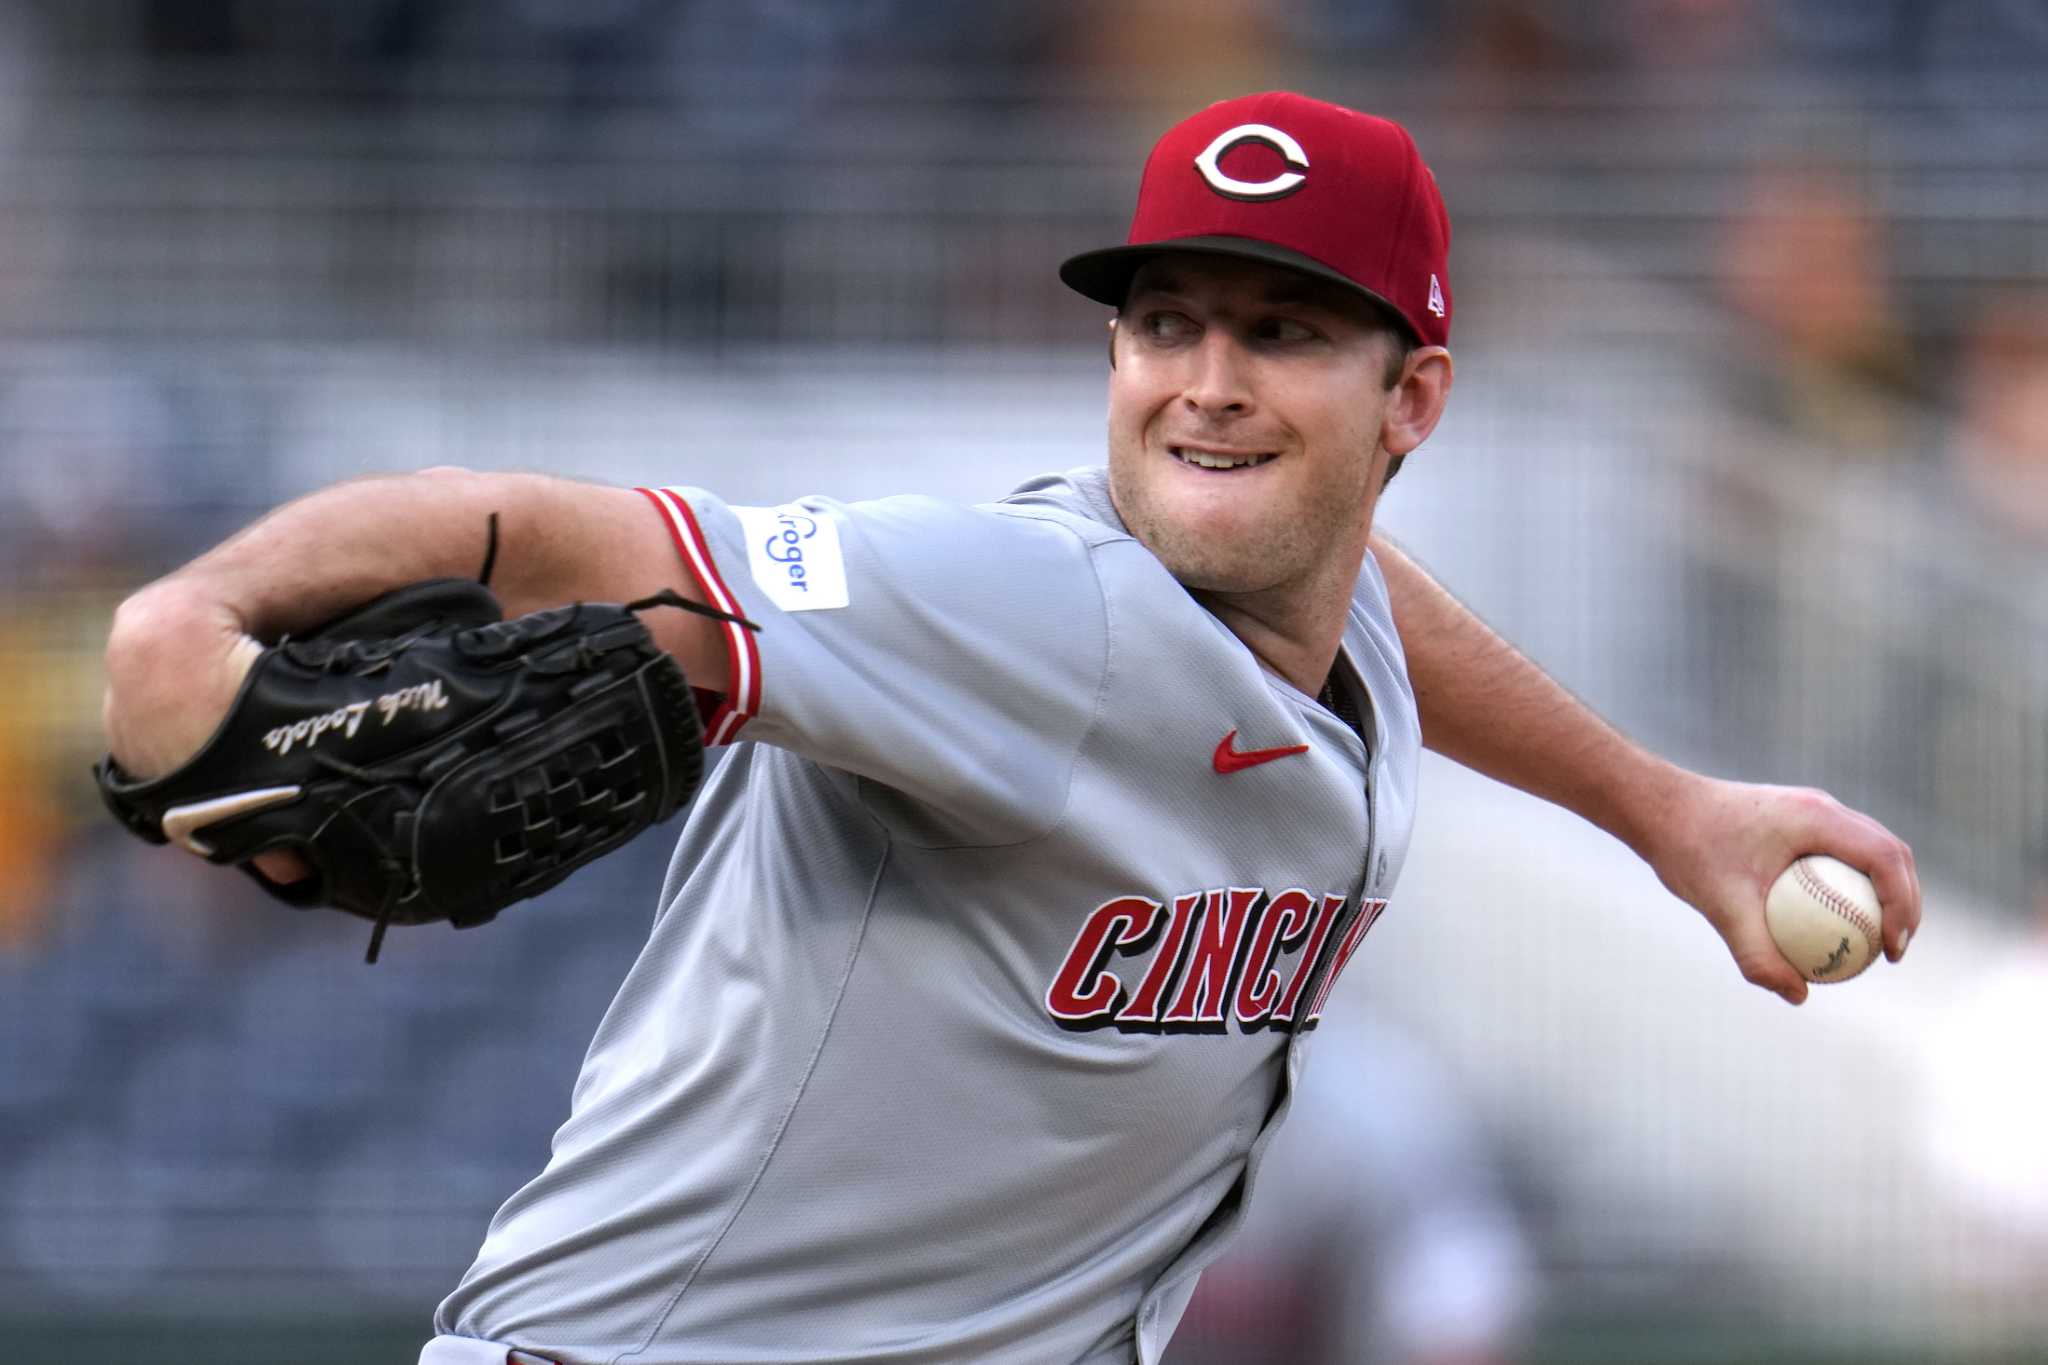 Lodolo cruises through 7 innings for 5th straight win, Espinal homers in Reds' 2-1 win over Pirates